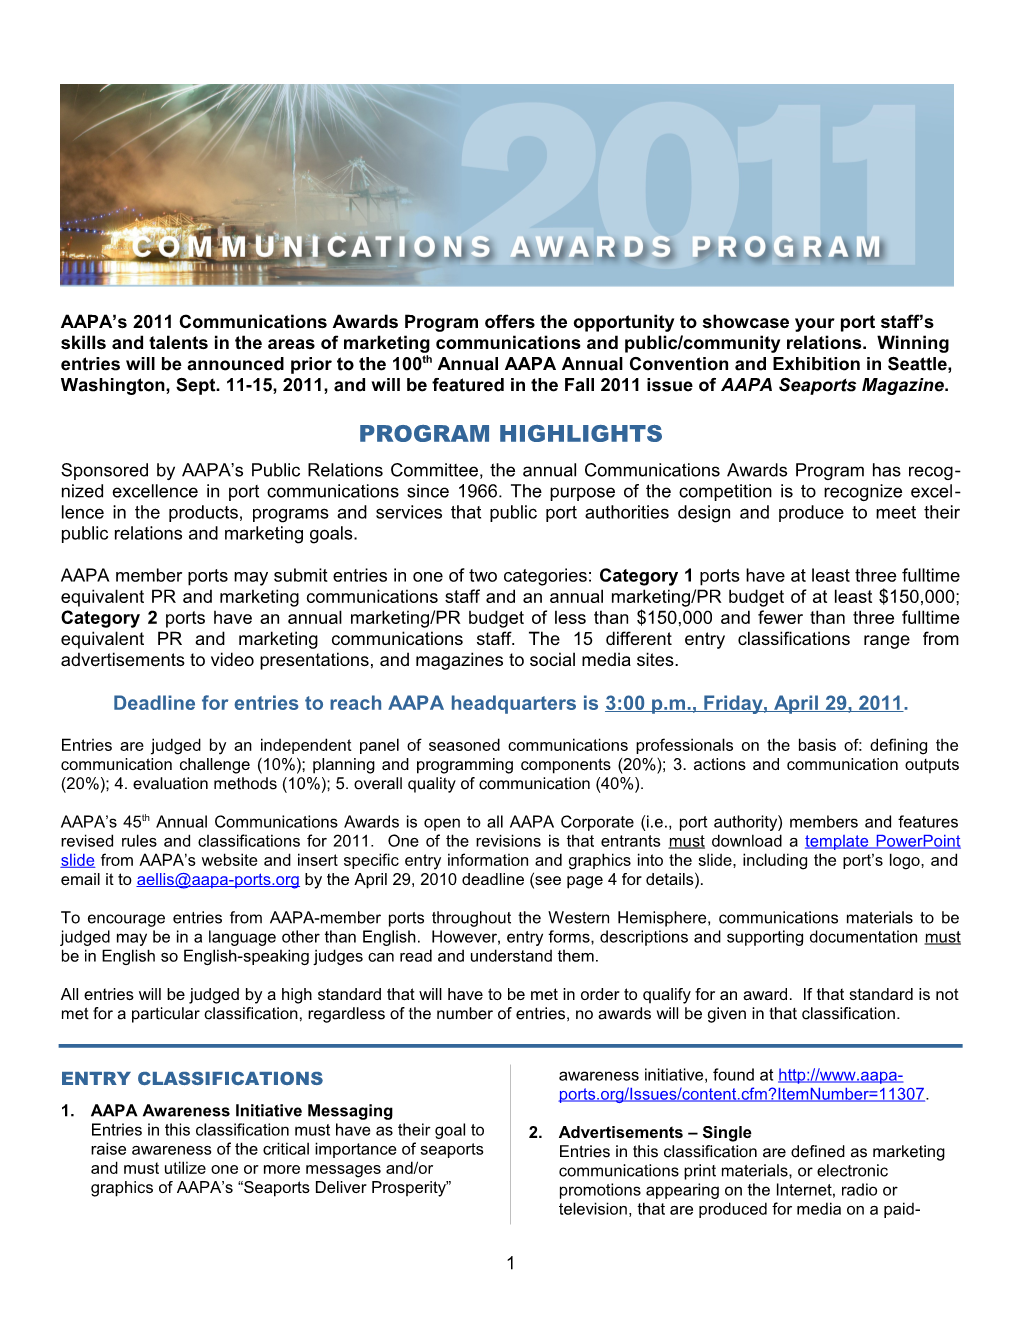 AAPA S 2011 Communications Awards Program Offers the Opportunity to Showcase Your Port